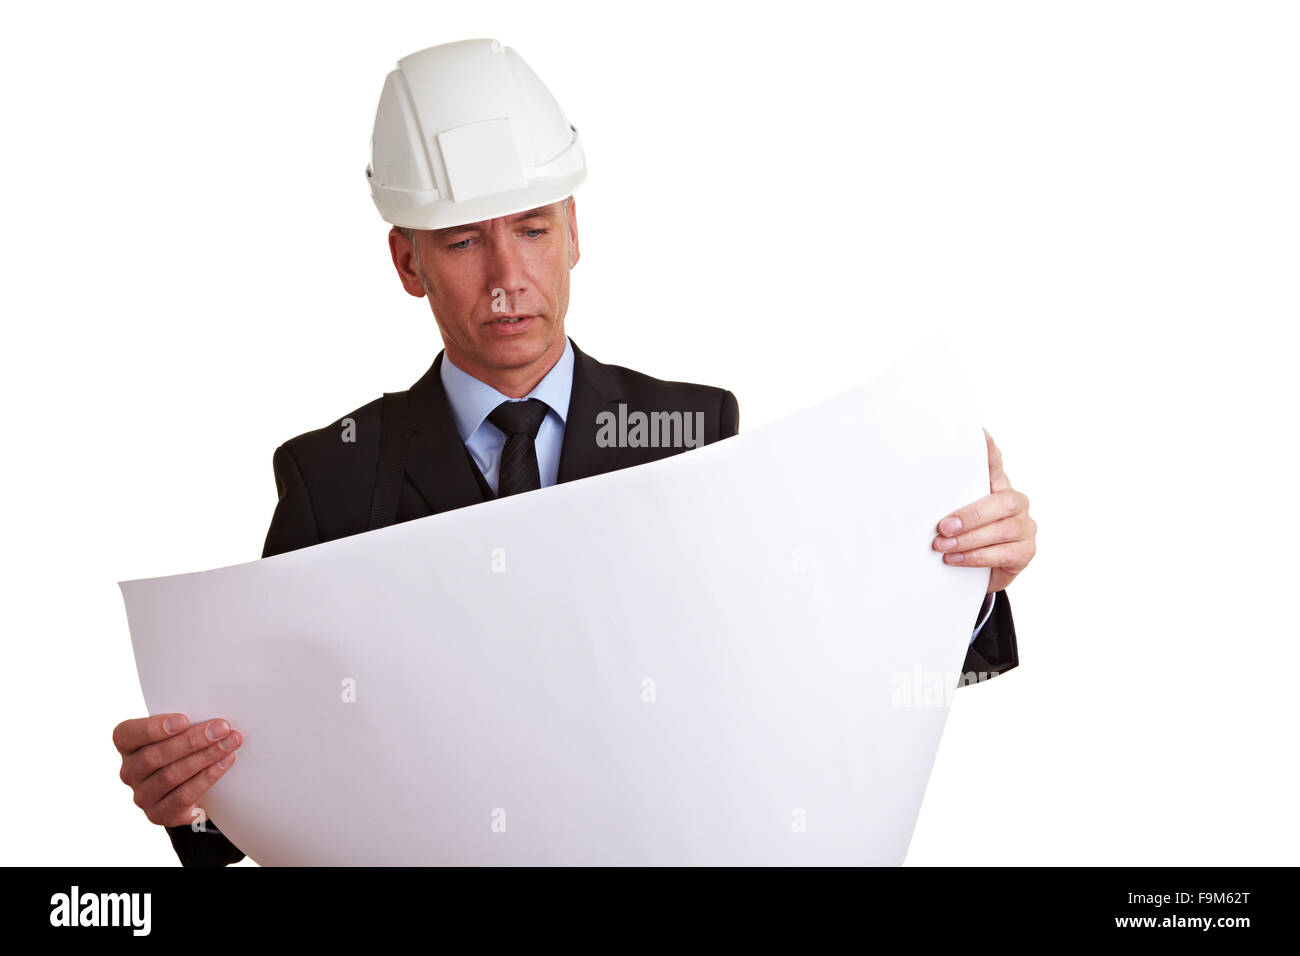 Architect with white helmet looking at construction prints Stock Photo